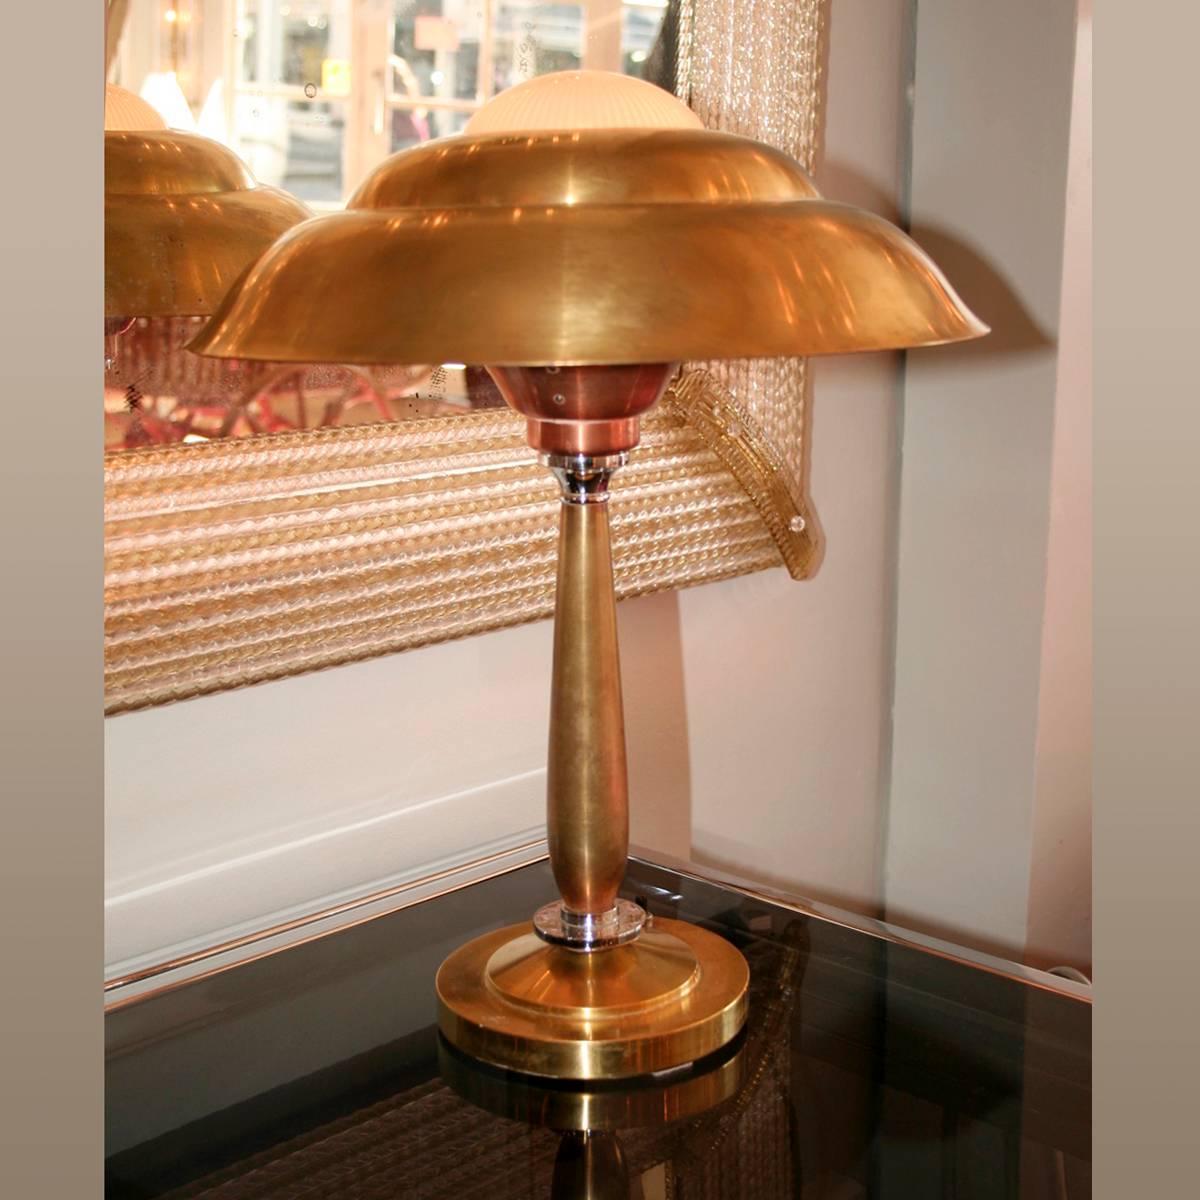 Beautifully-detailed domed lamp. The body and dome are made of brass while there are chrome and copper details on the main support topped by a small ribbed glass dome.